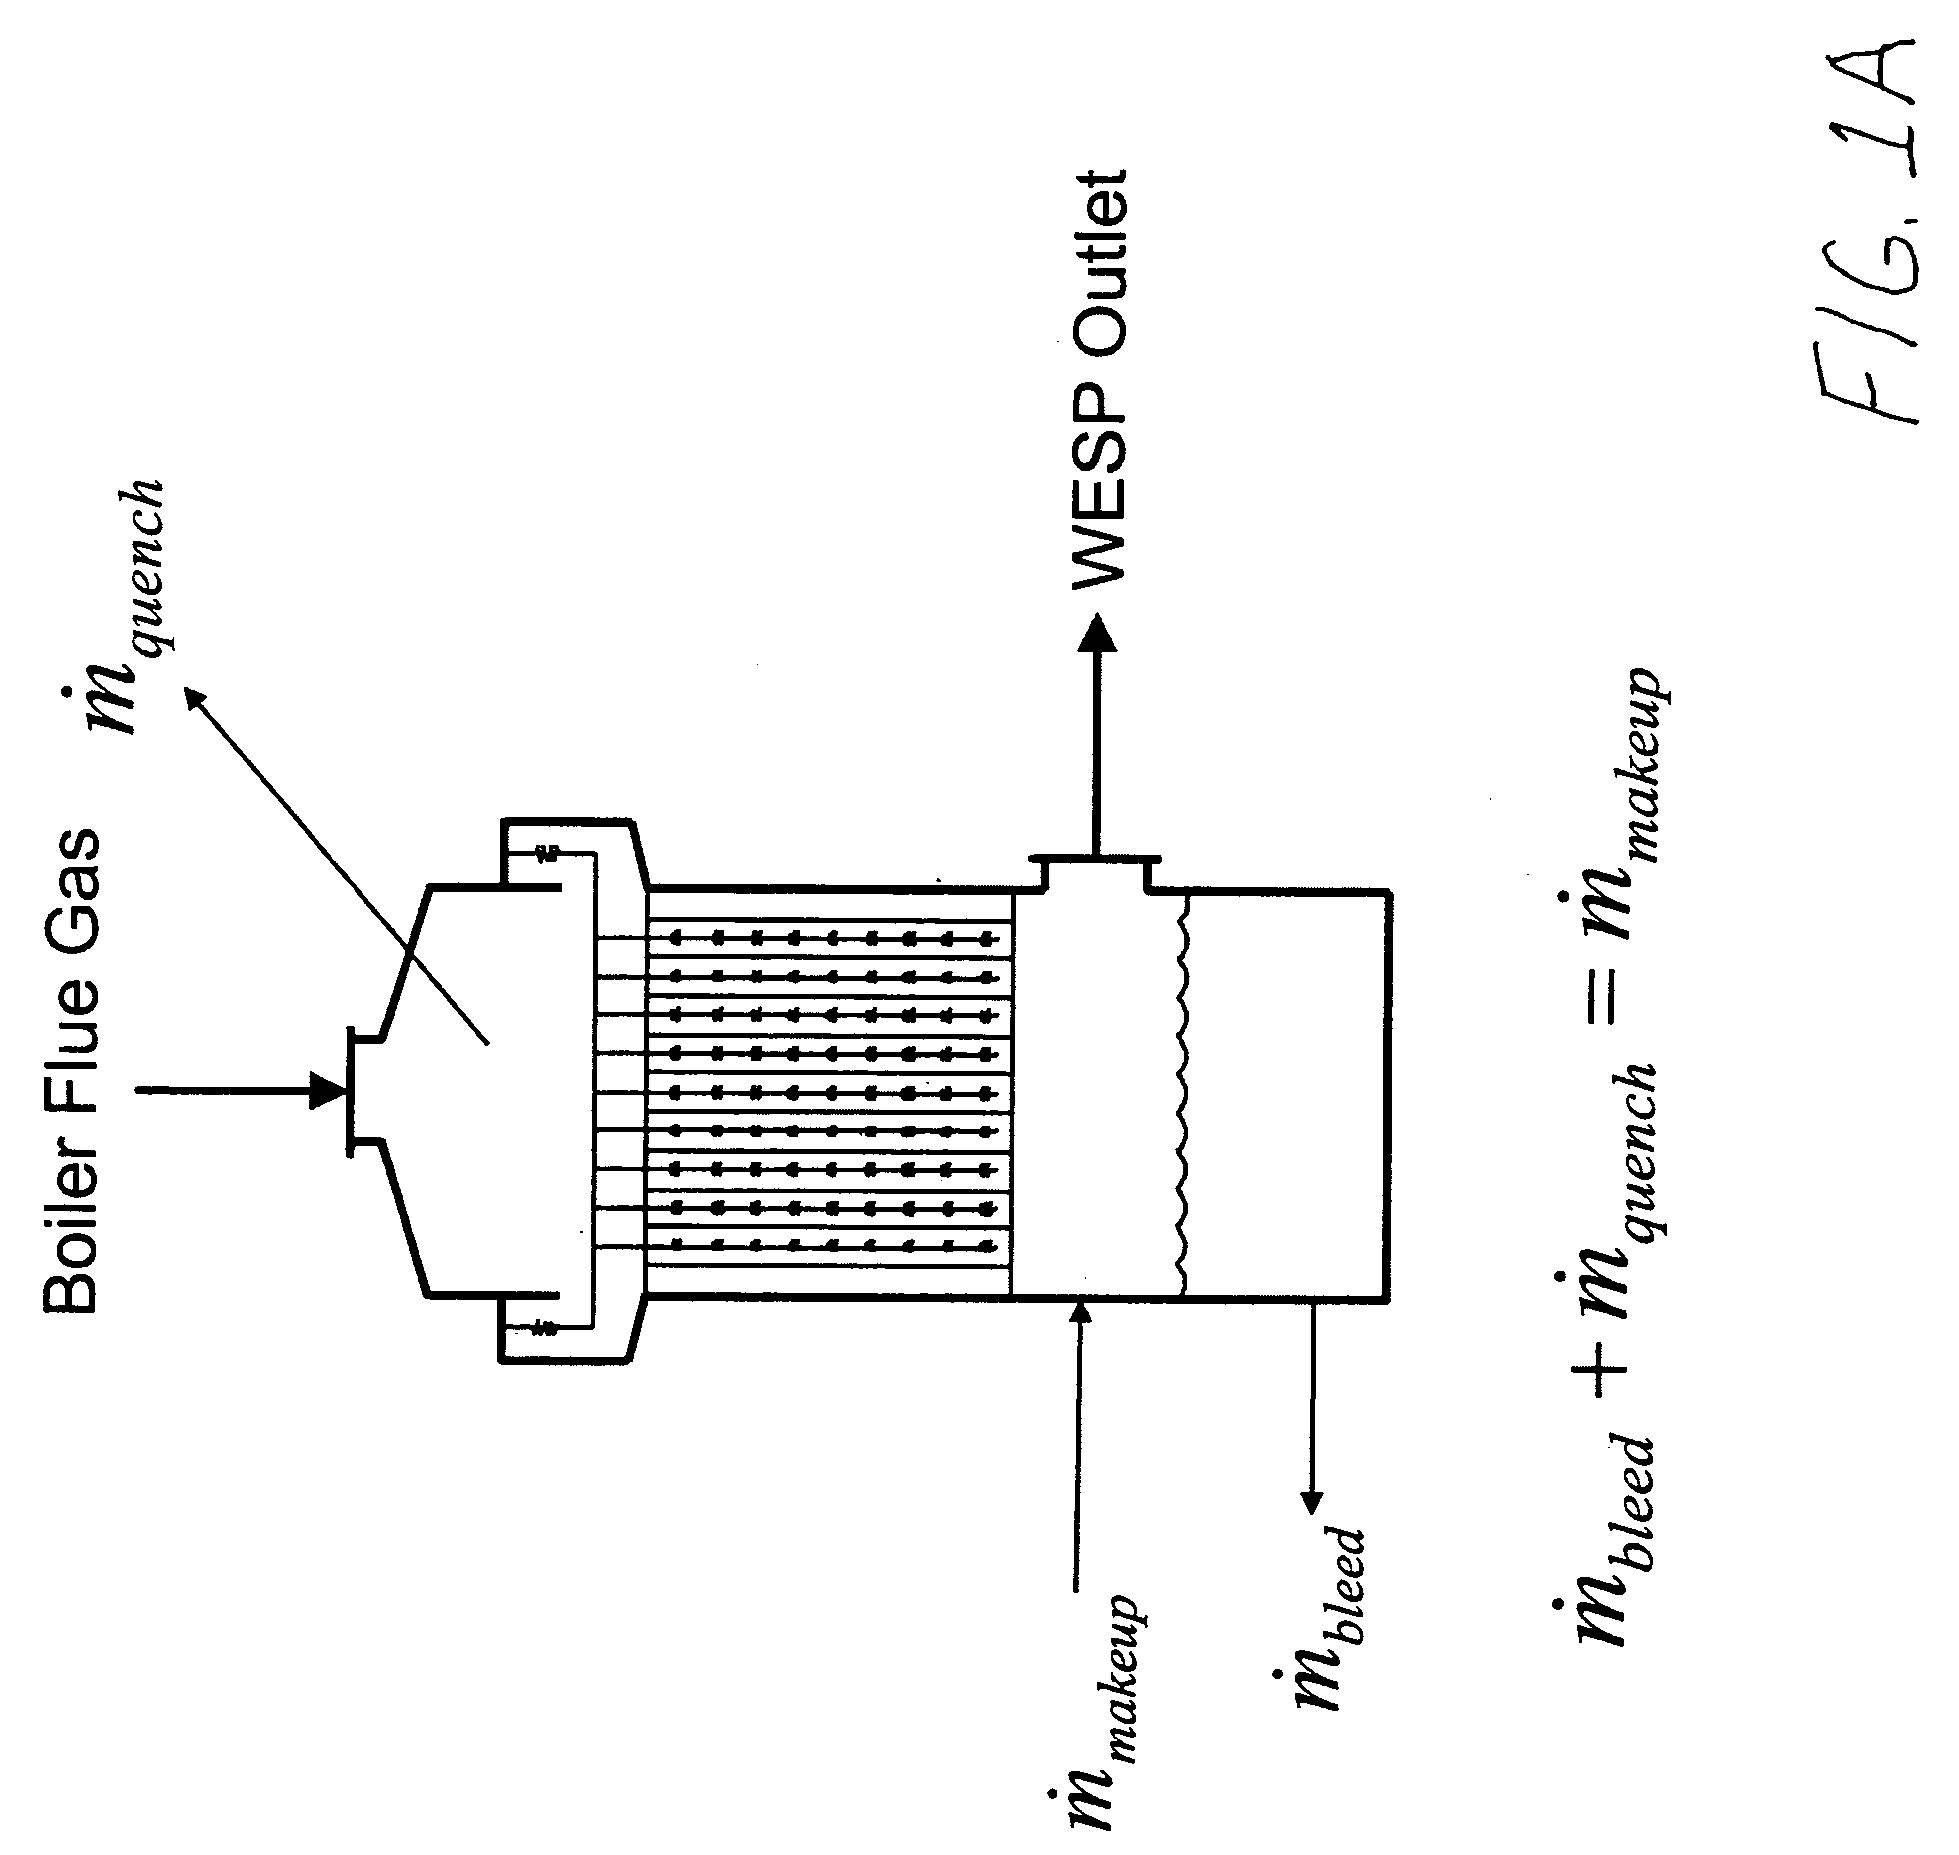 Method and apparatus for eliminating or reducing waste effluent from a wet electrostatic precipitator